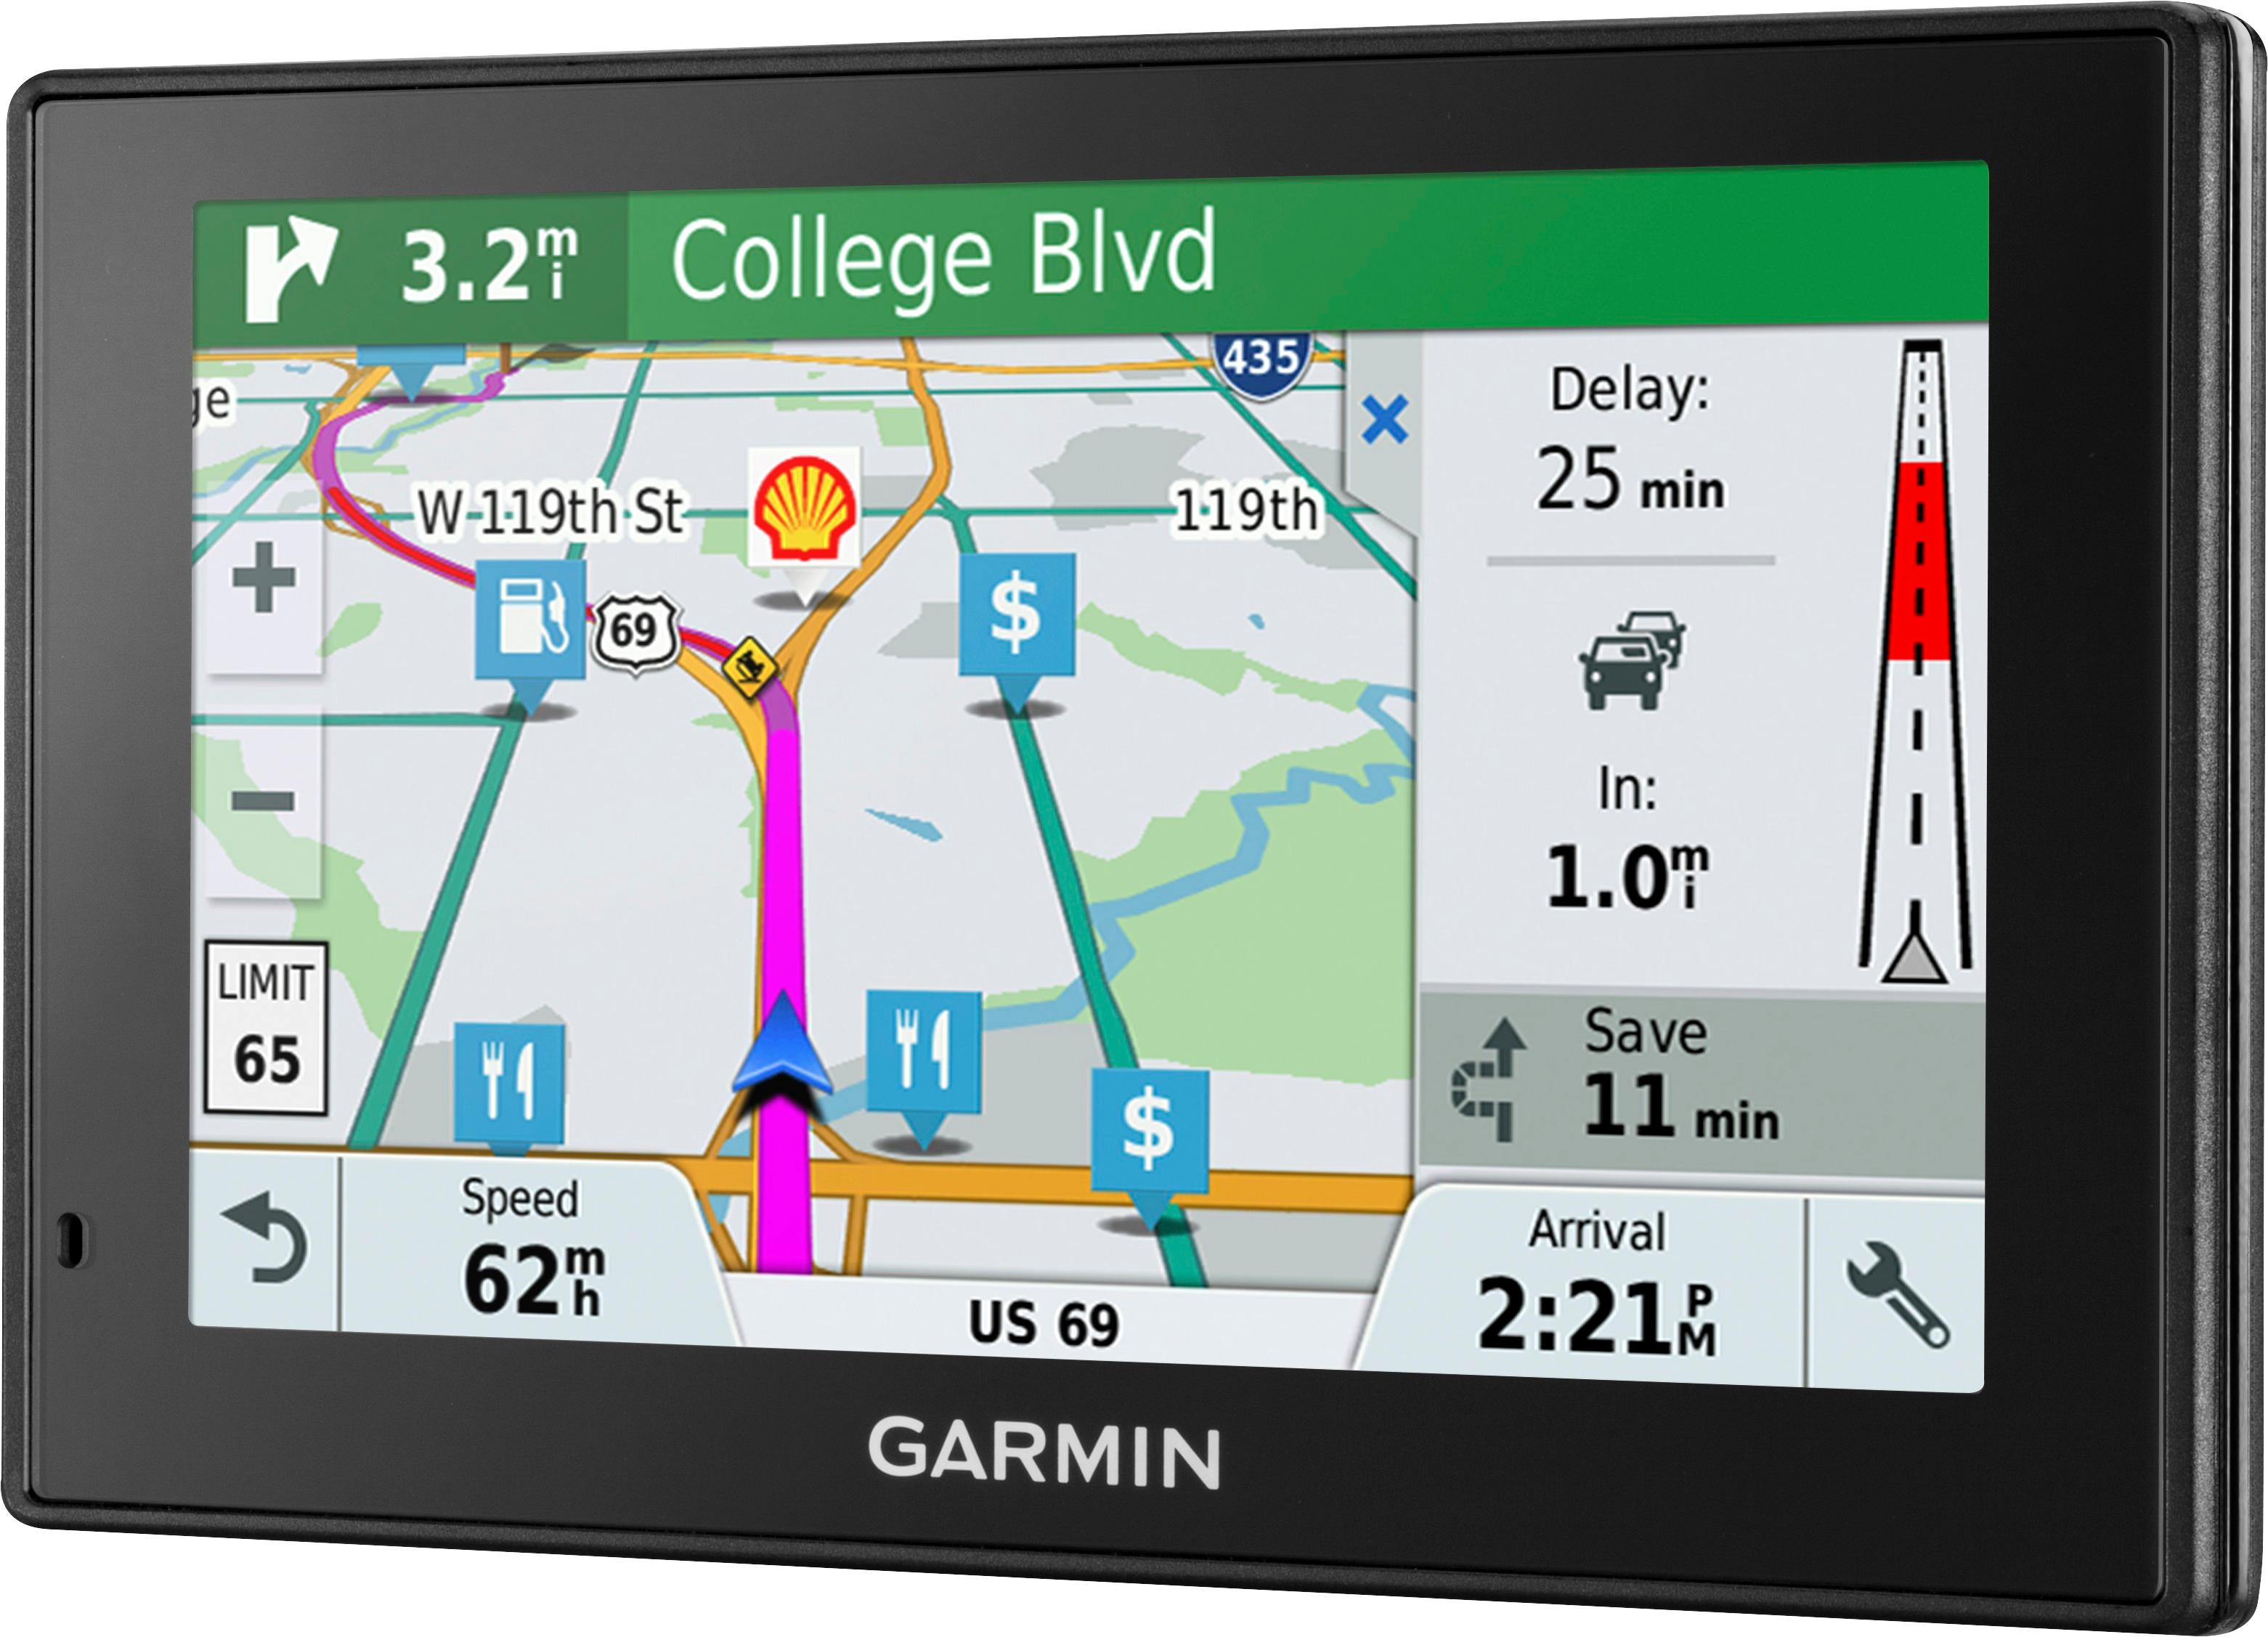 Left View: Garmin Drive Smart 51 GPS Navigator with Built-In WiFi plus Lifetime Maps and Traffic of North America